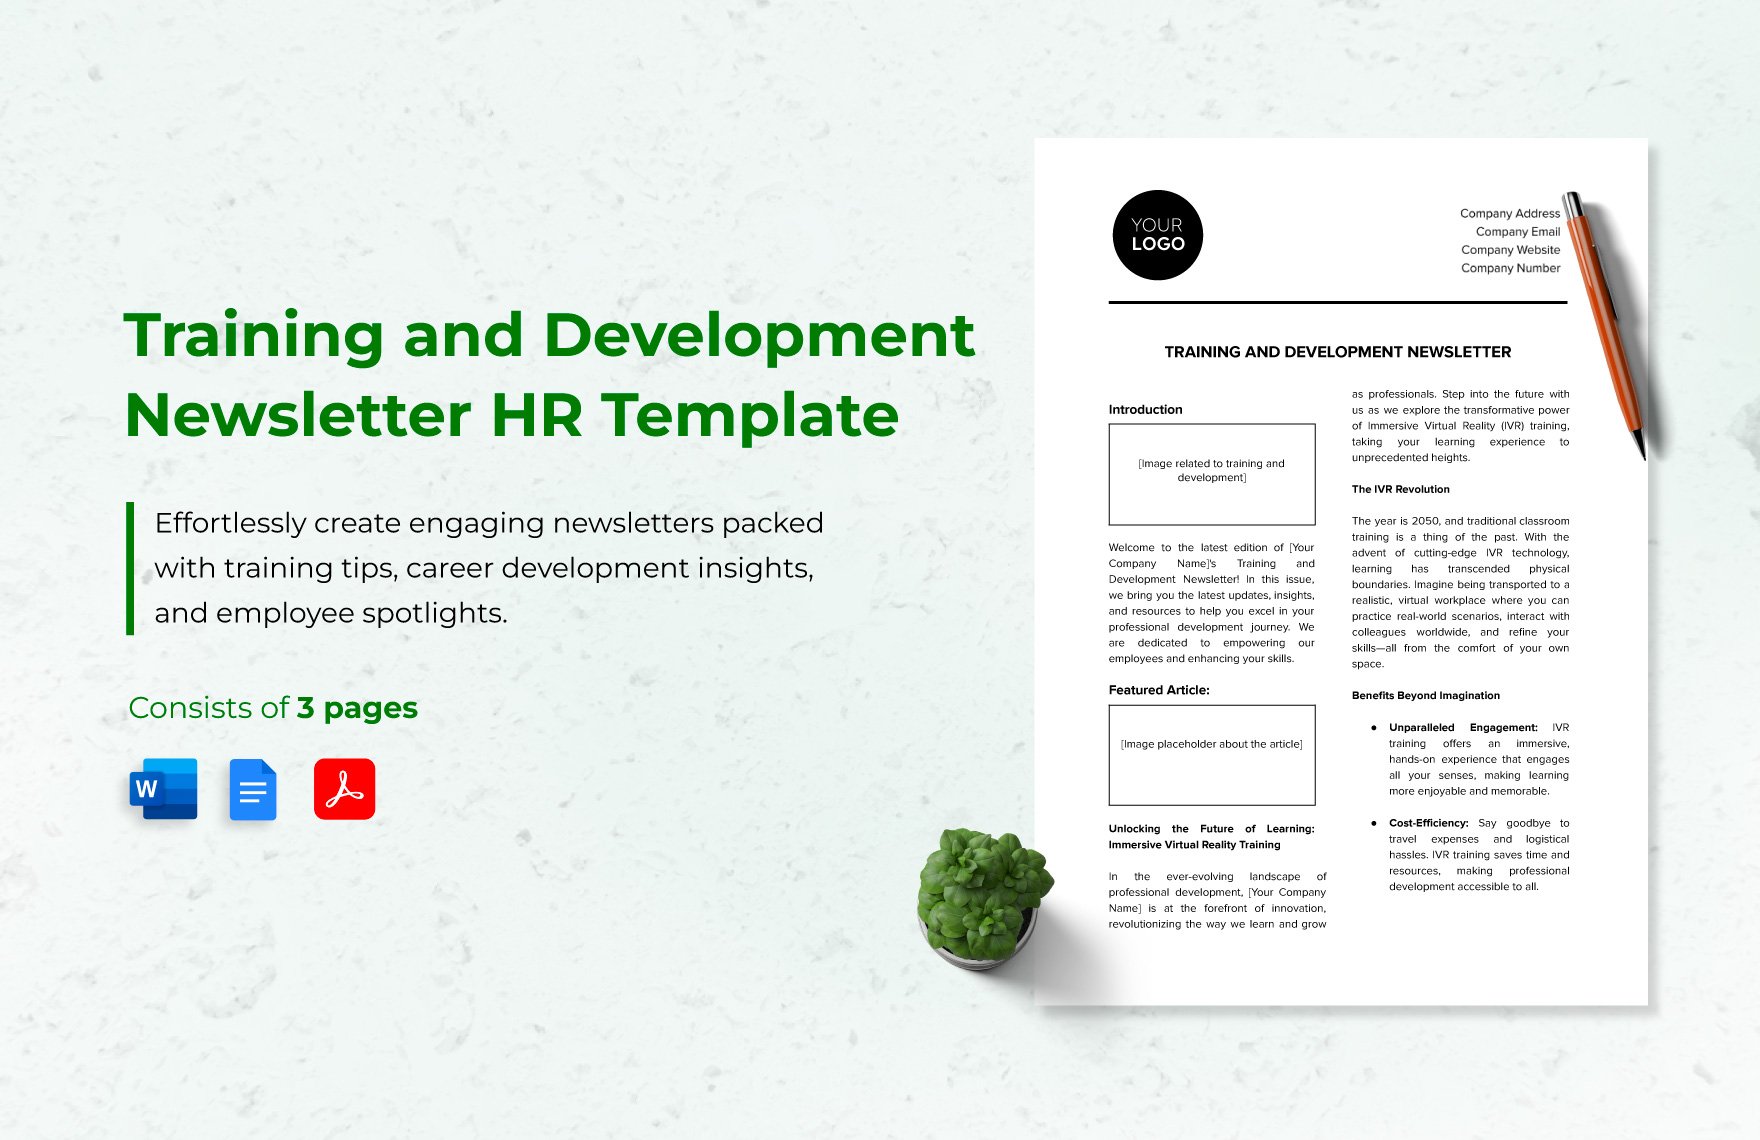 Training and Development Newsletter HR Template in Word, Google Docs, PDF